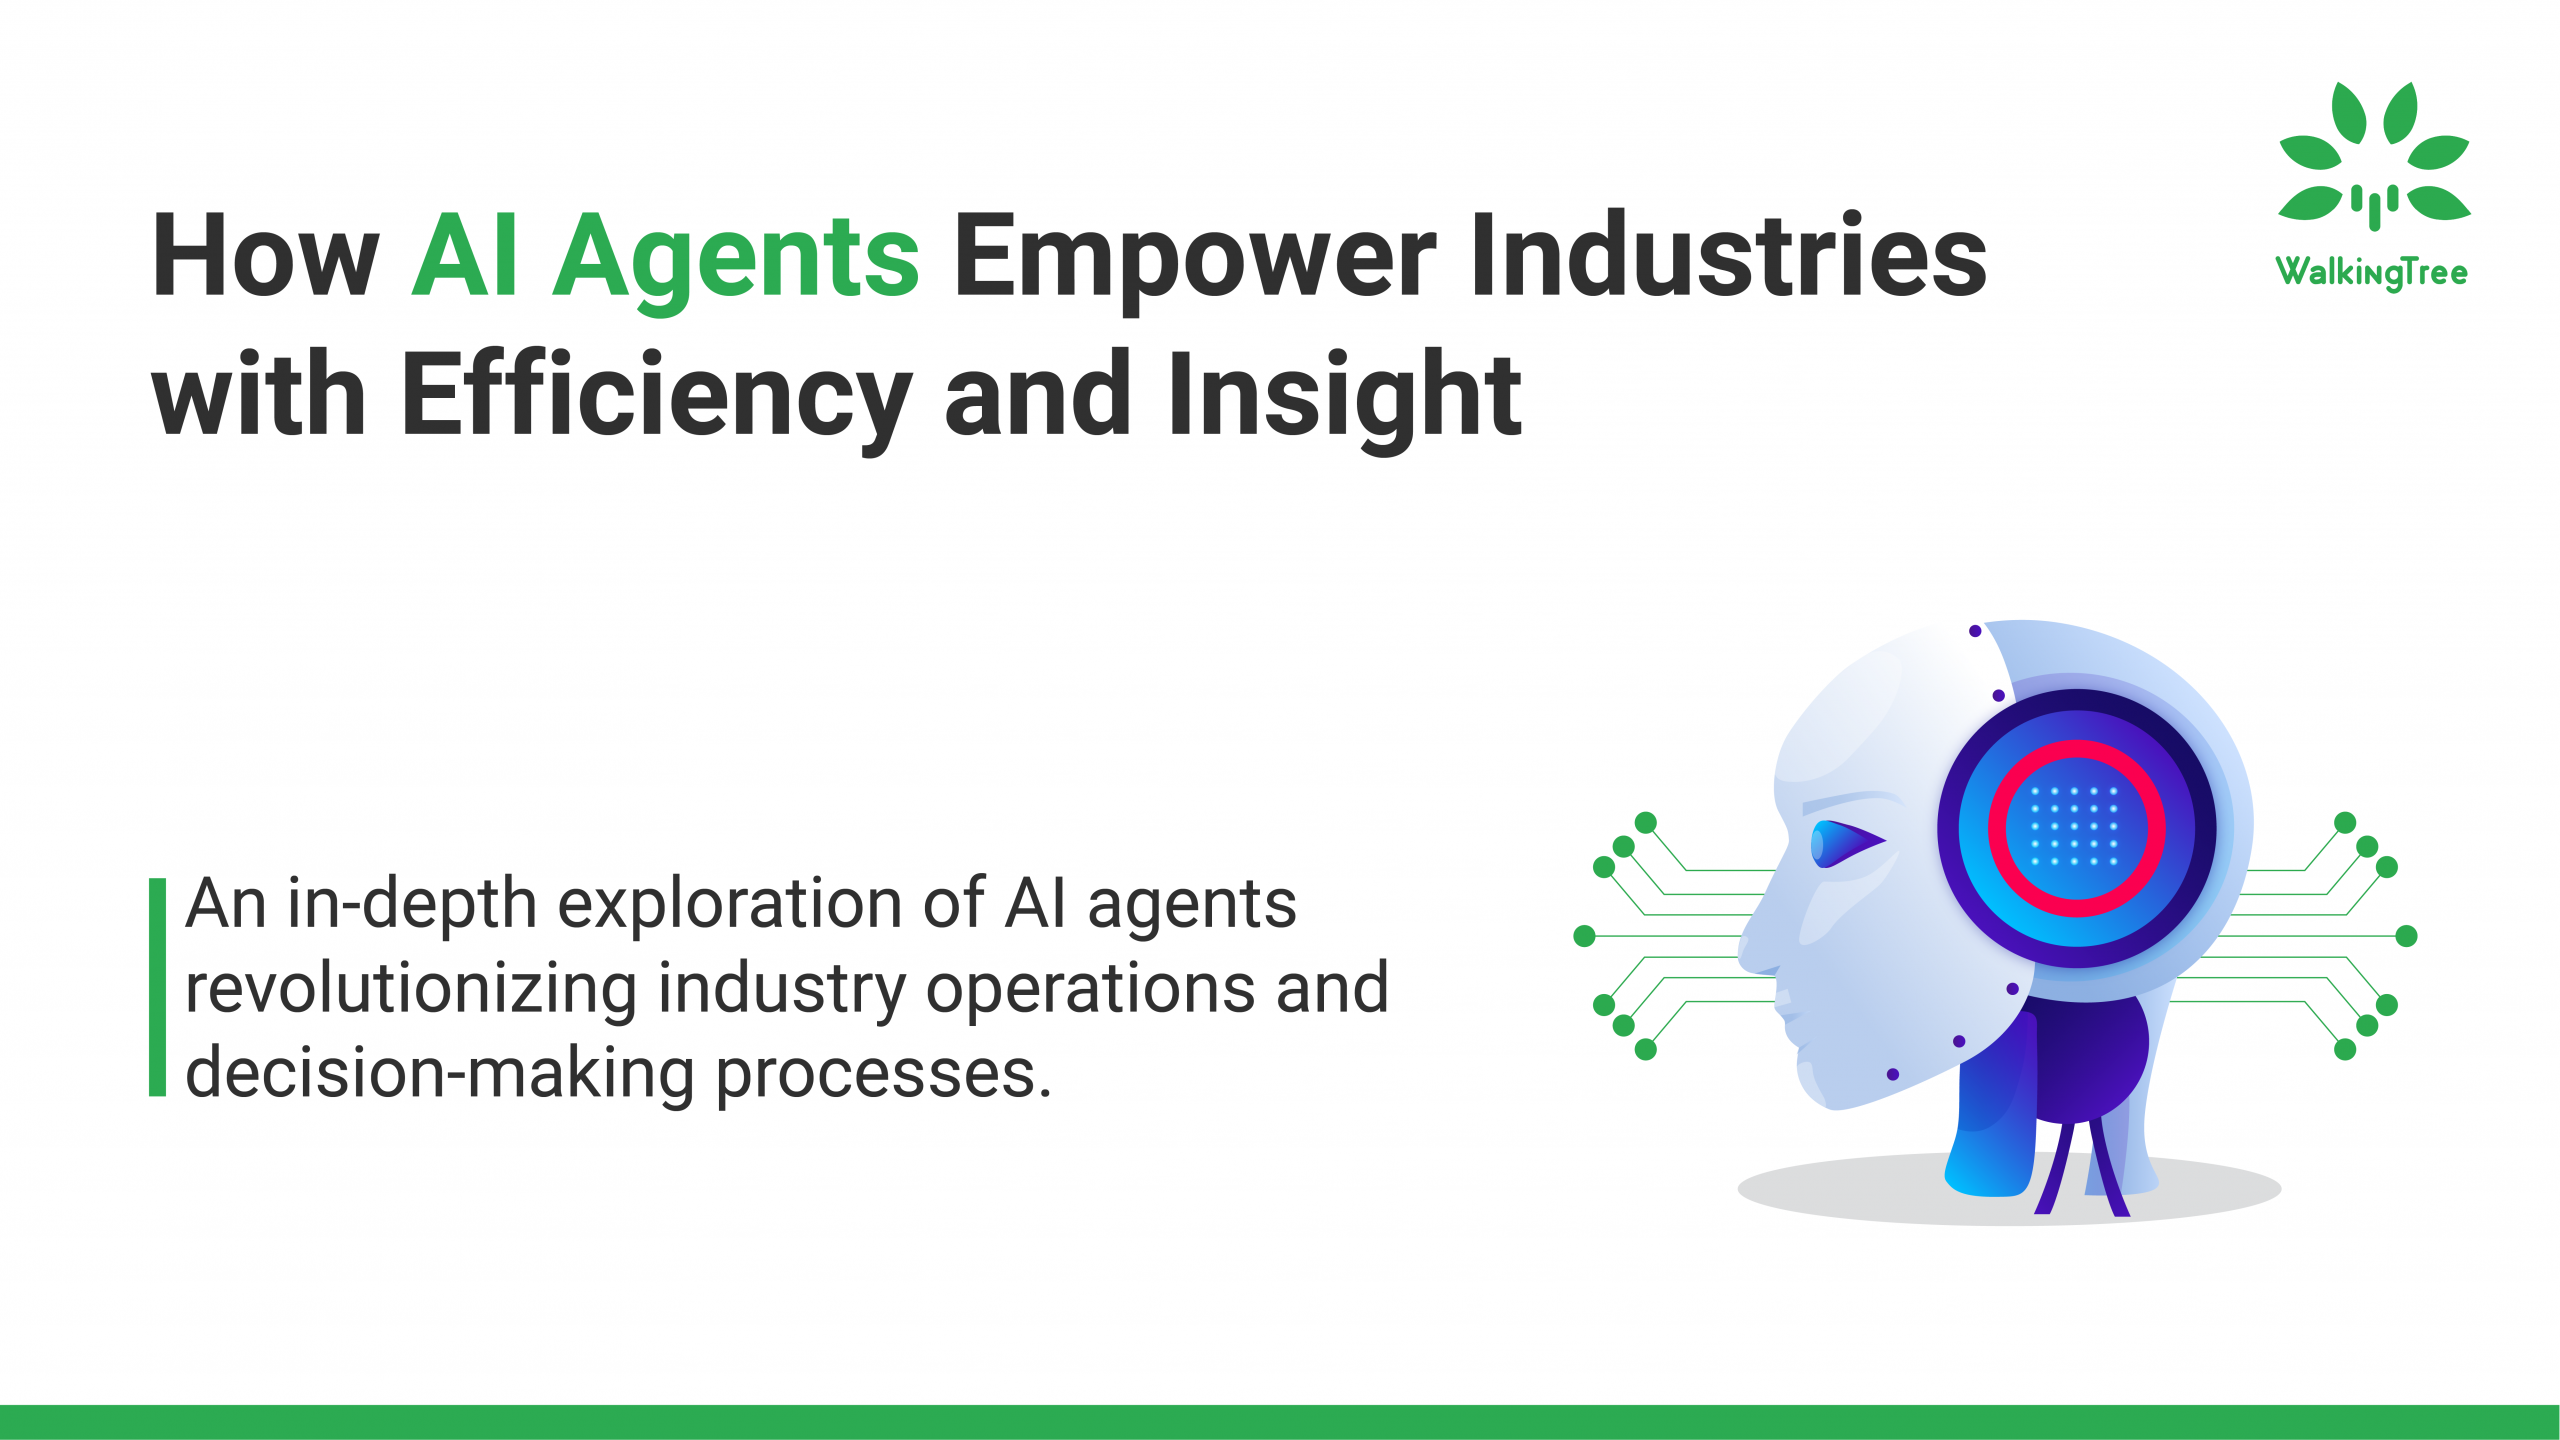 How AI Agents Empower Industries with Efficiency and Insight